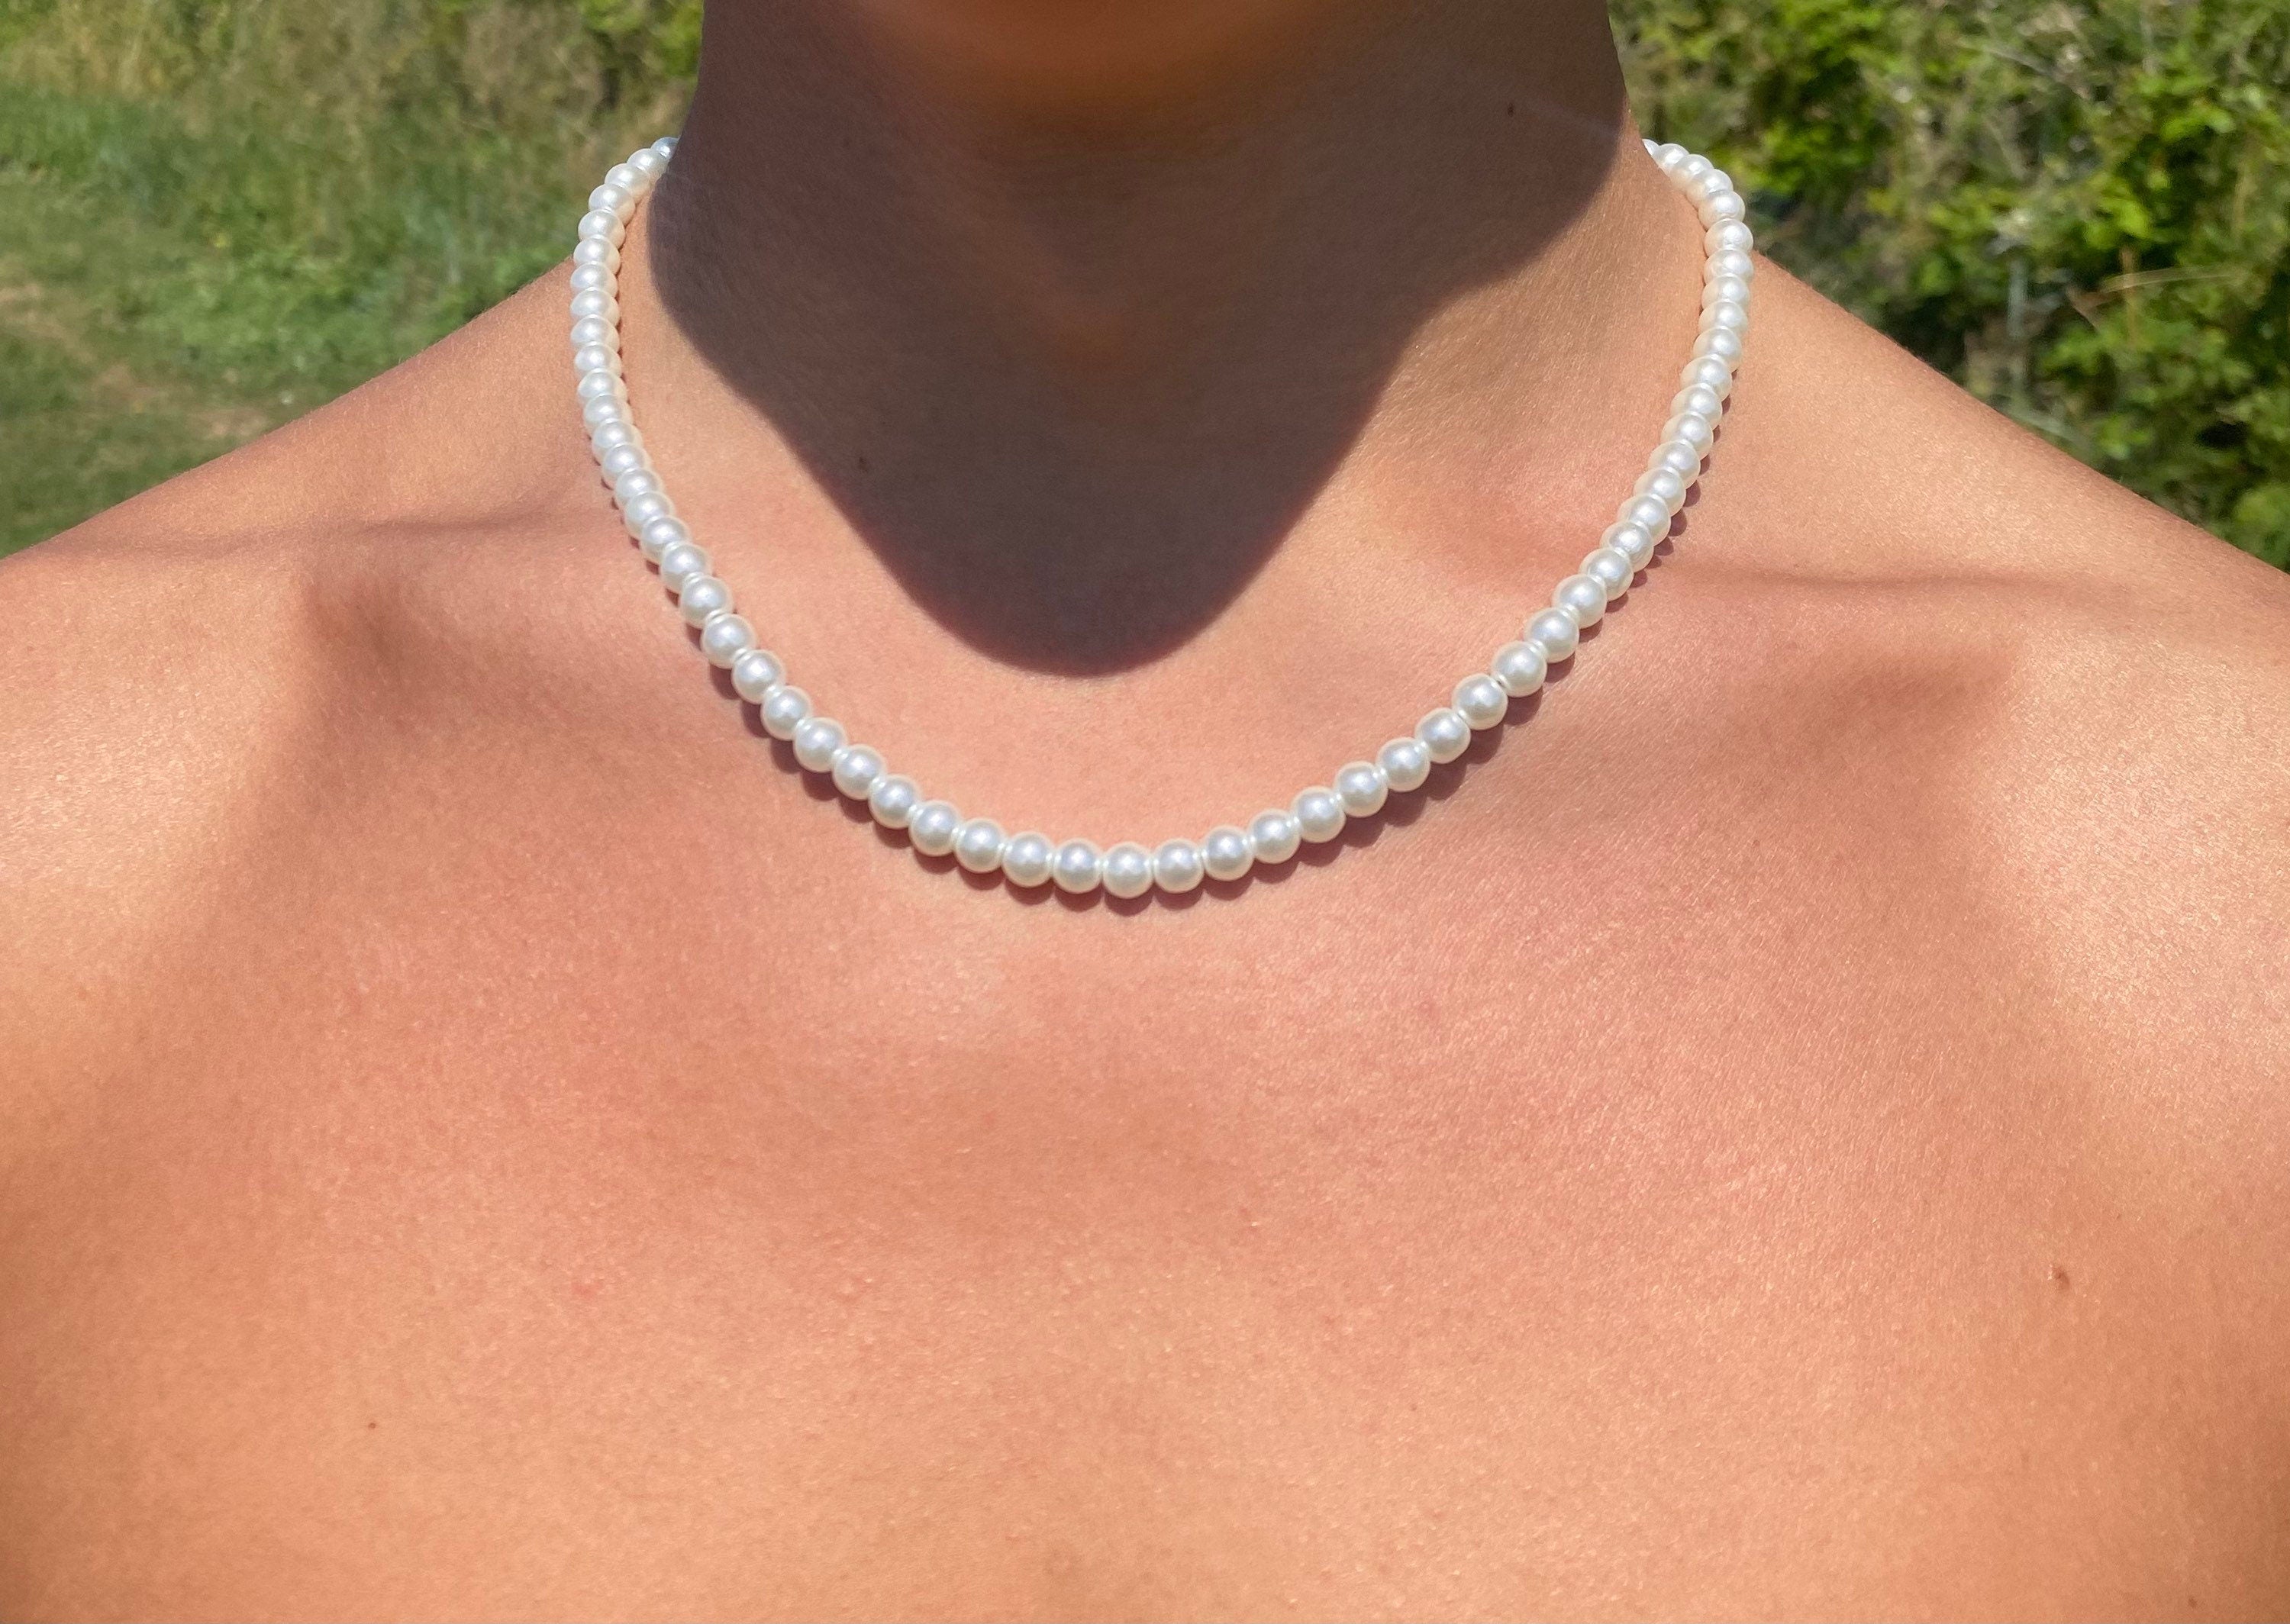 Chain and Pearls: Modern Men's Neckwear - Men's Chain Necklaces